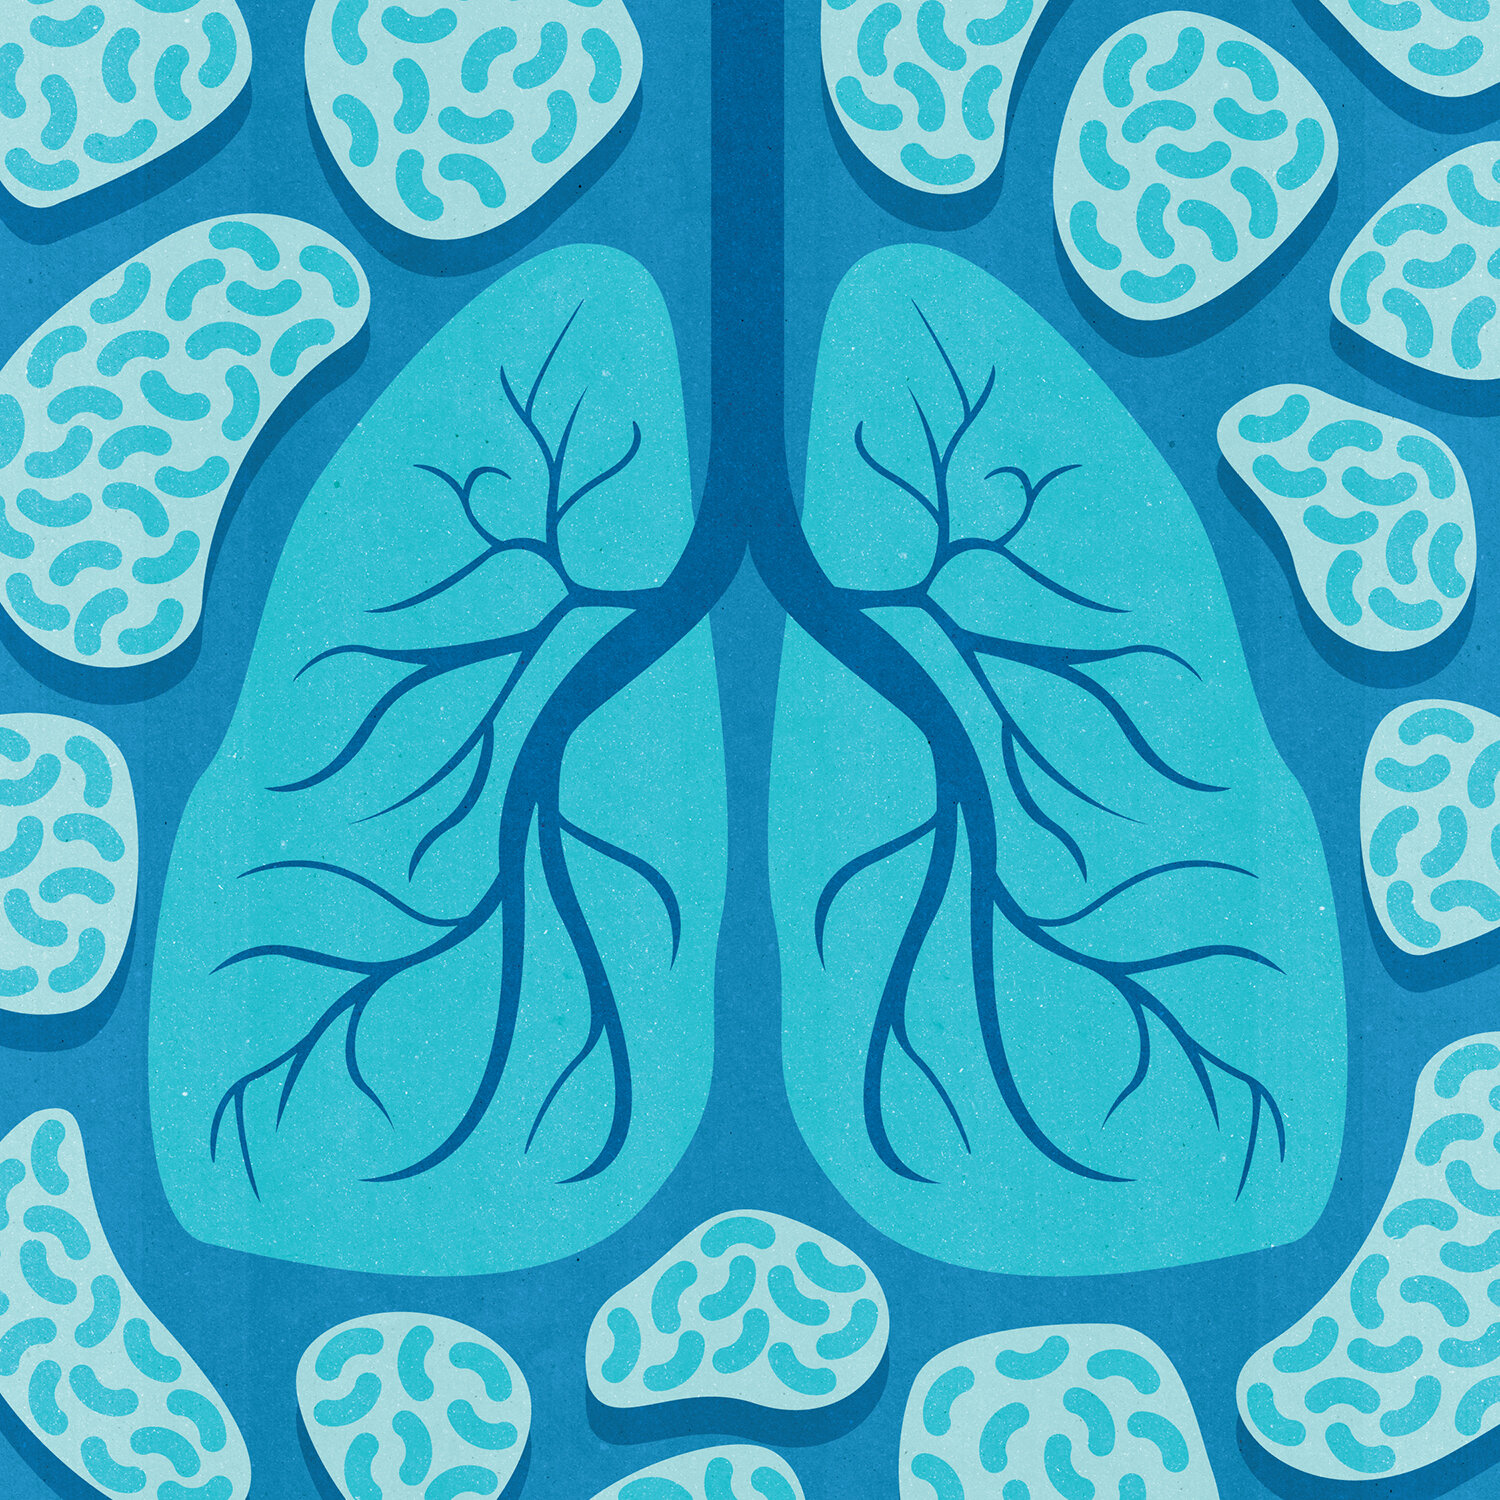 Lungs Virus Infection Blue 15 x 15 in_textures RGB 1500.jpg